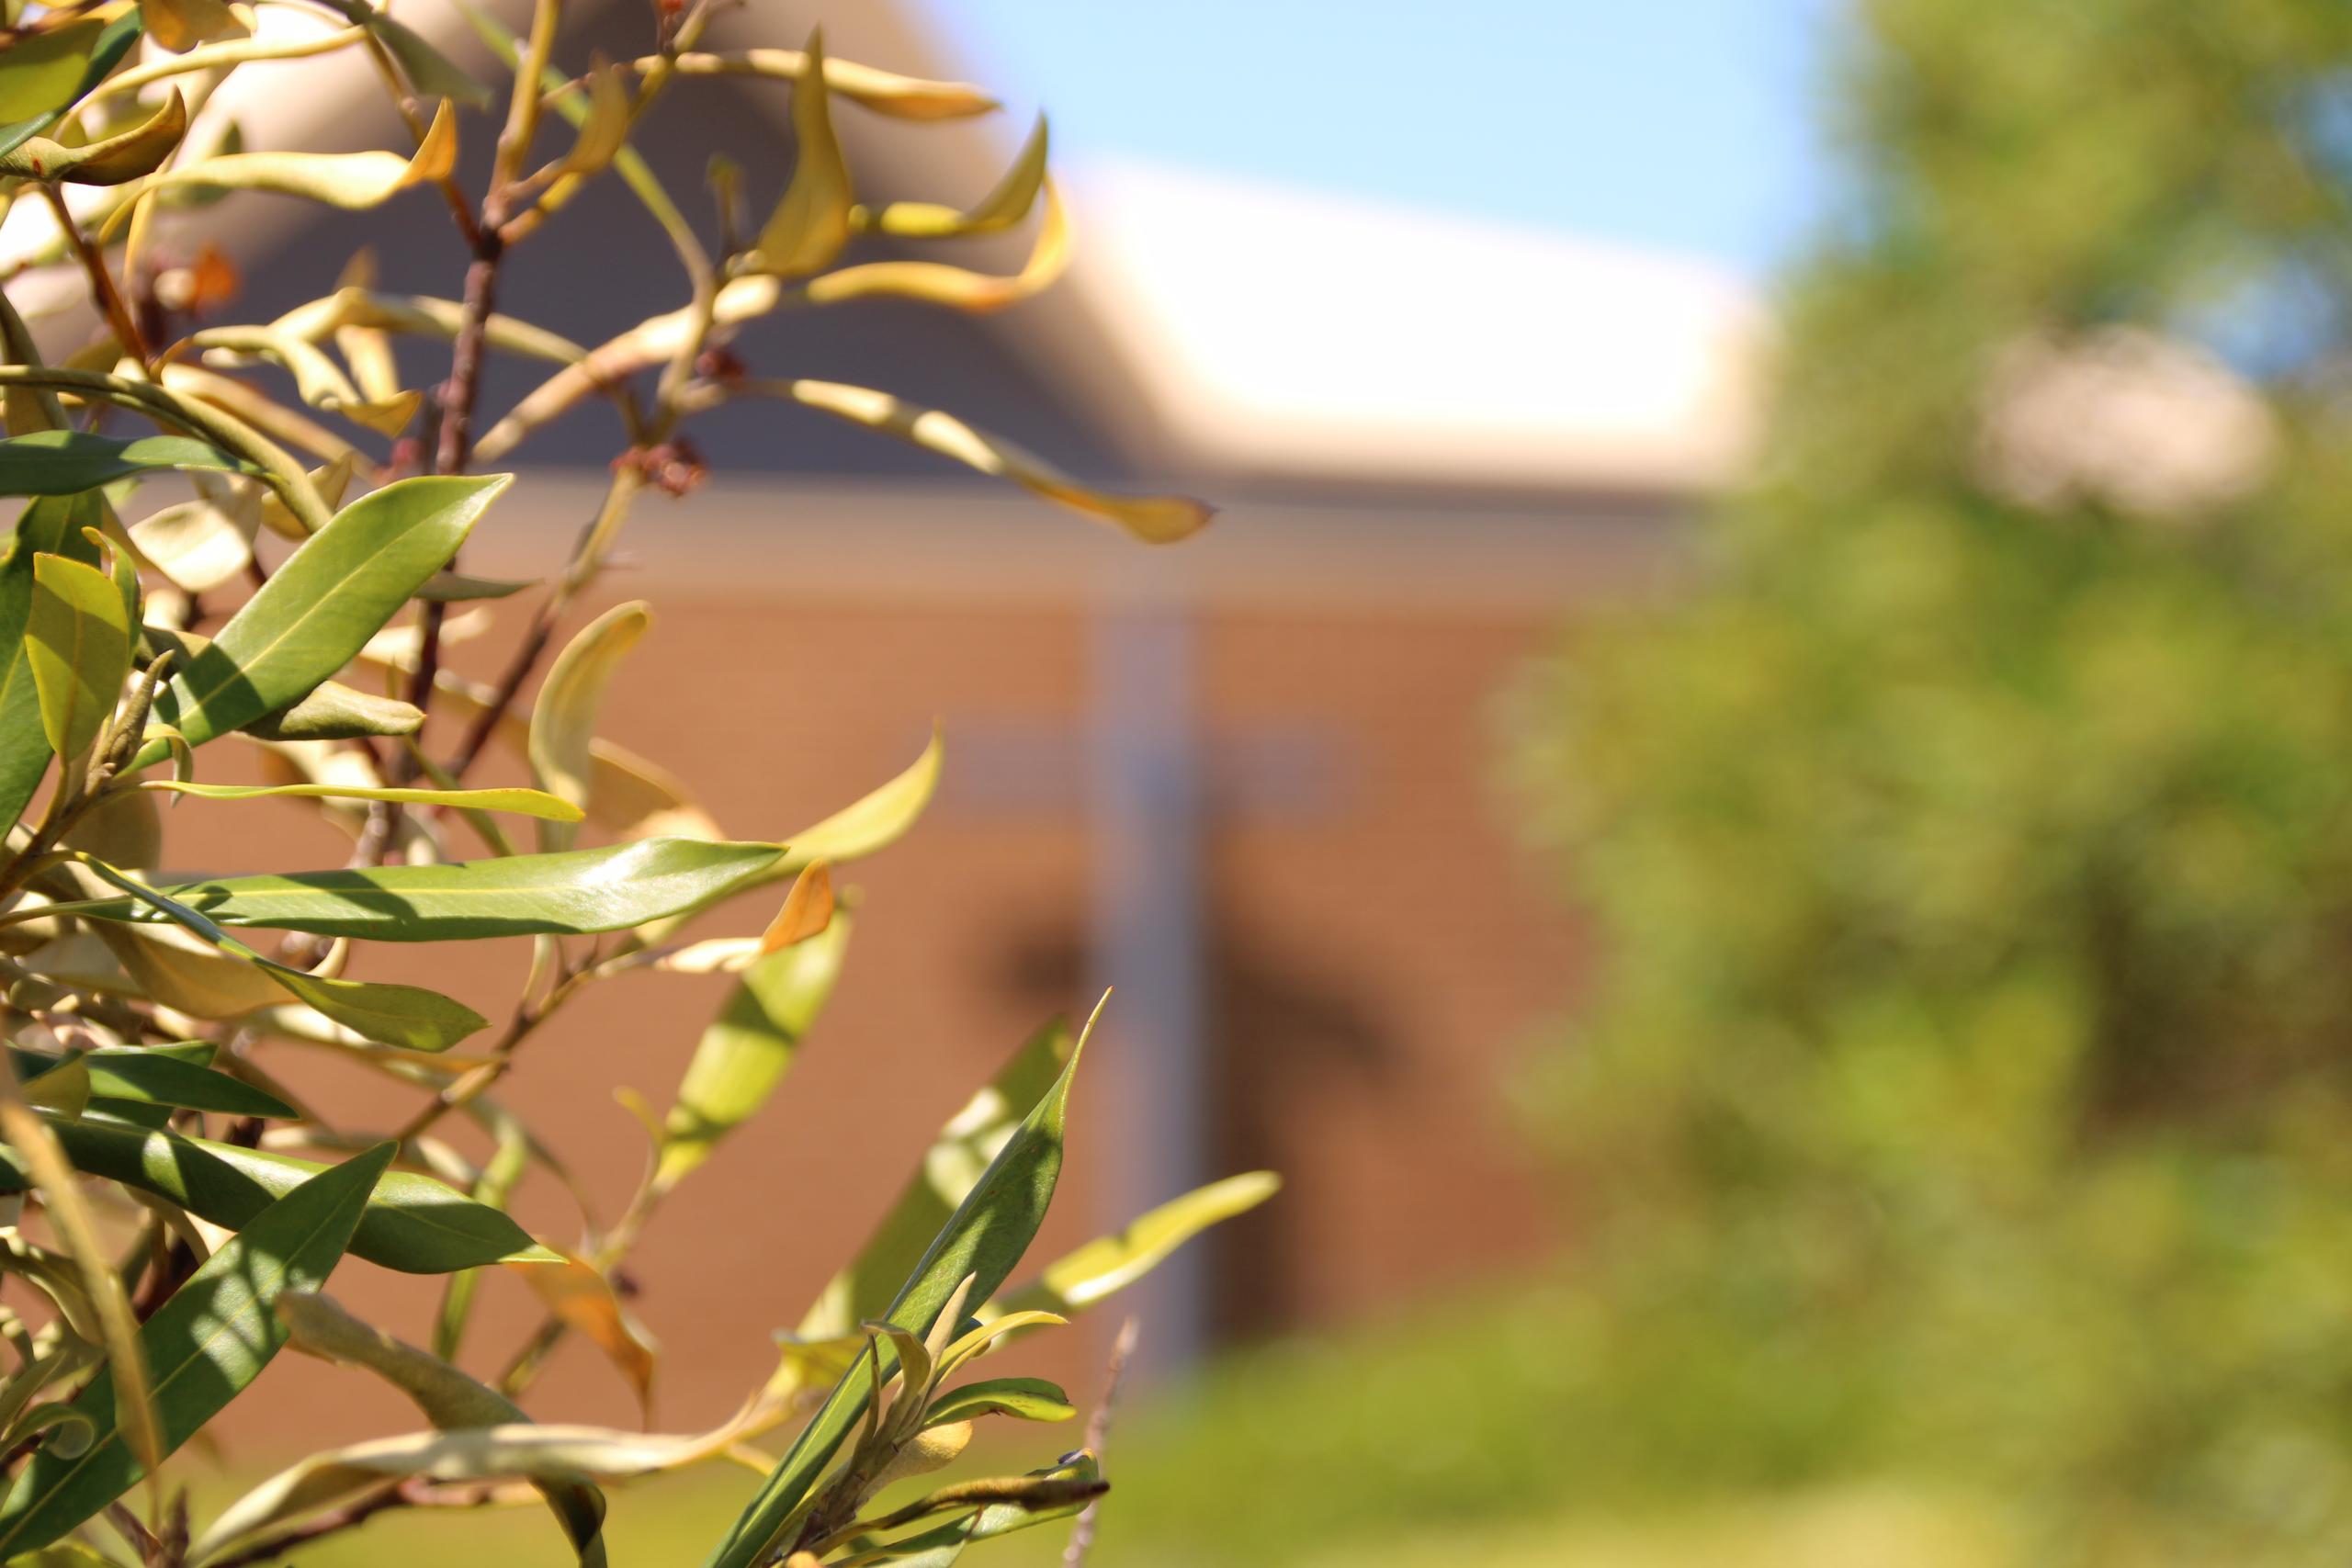 Green foliage in focus while front brick facade of the MVAC hall featuring a blue metal cross is blurred.